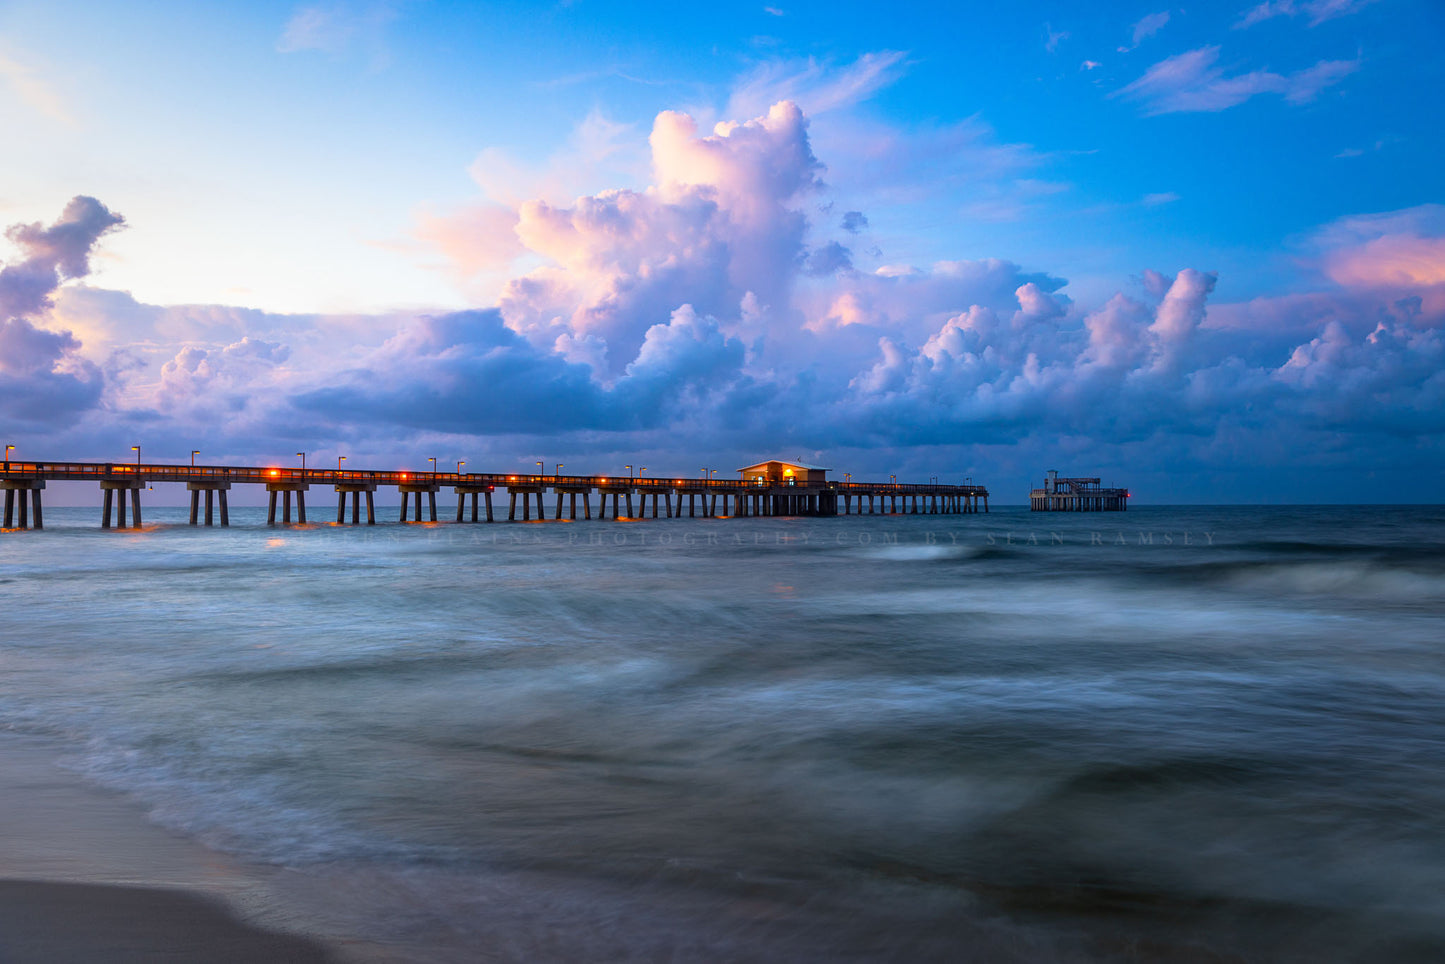 Gulf Coast photography print of the Gulf State Park Pier as waves roll ashore along a beach at sunrise in Gulf Shores, Alabama by Sean Ramsey of Southern Plains Photography.